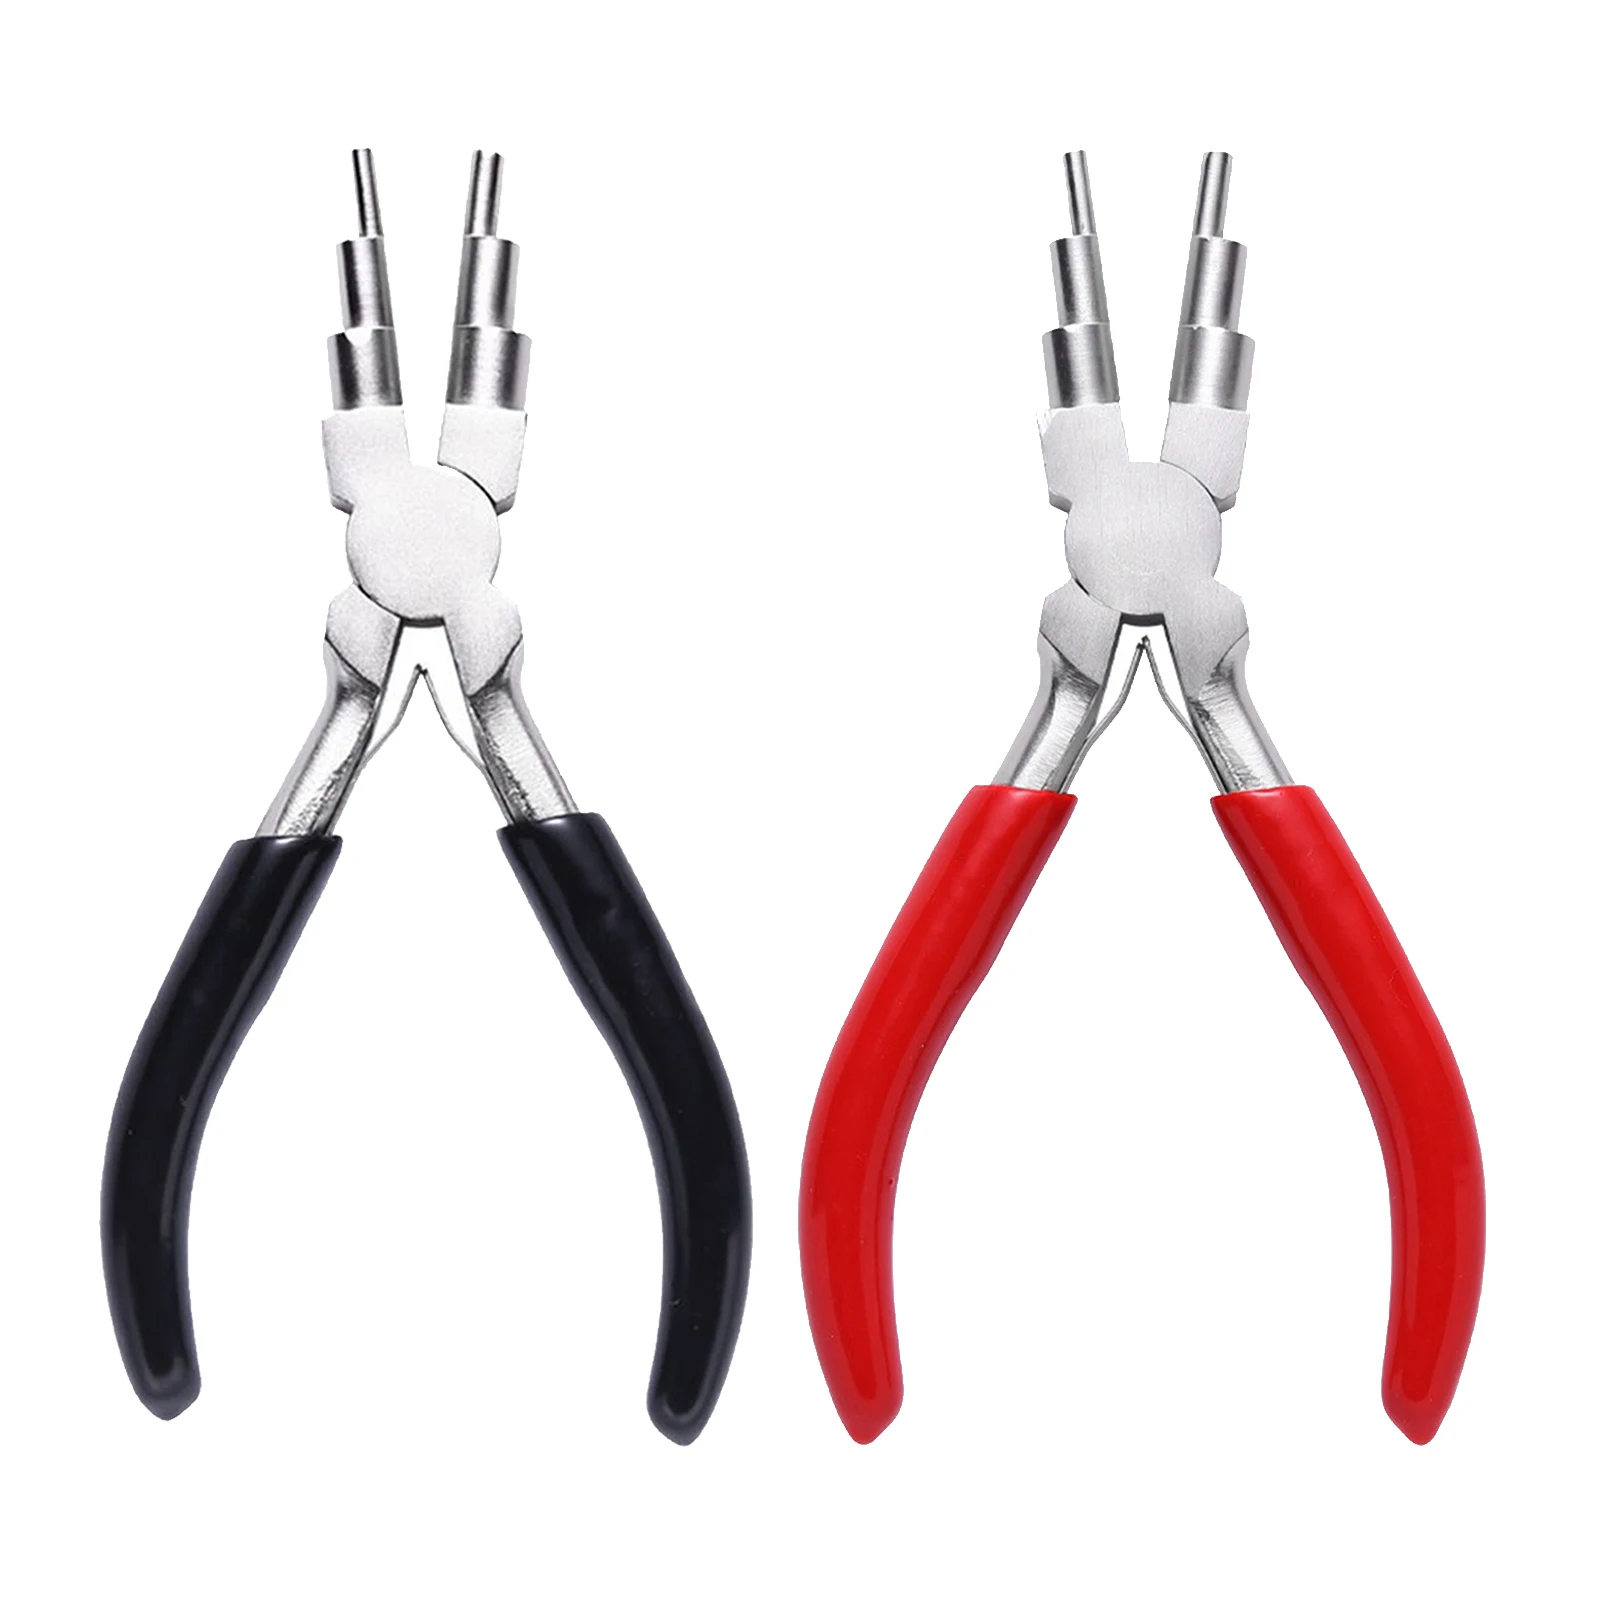 

Bail Making Pliers DIY Jewelry Tool Sets Carbon Steel Round Nose Pliers Jewelry Wire Looping Forming for Jewelry Making Tools